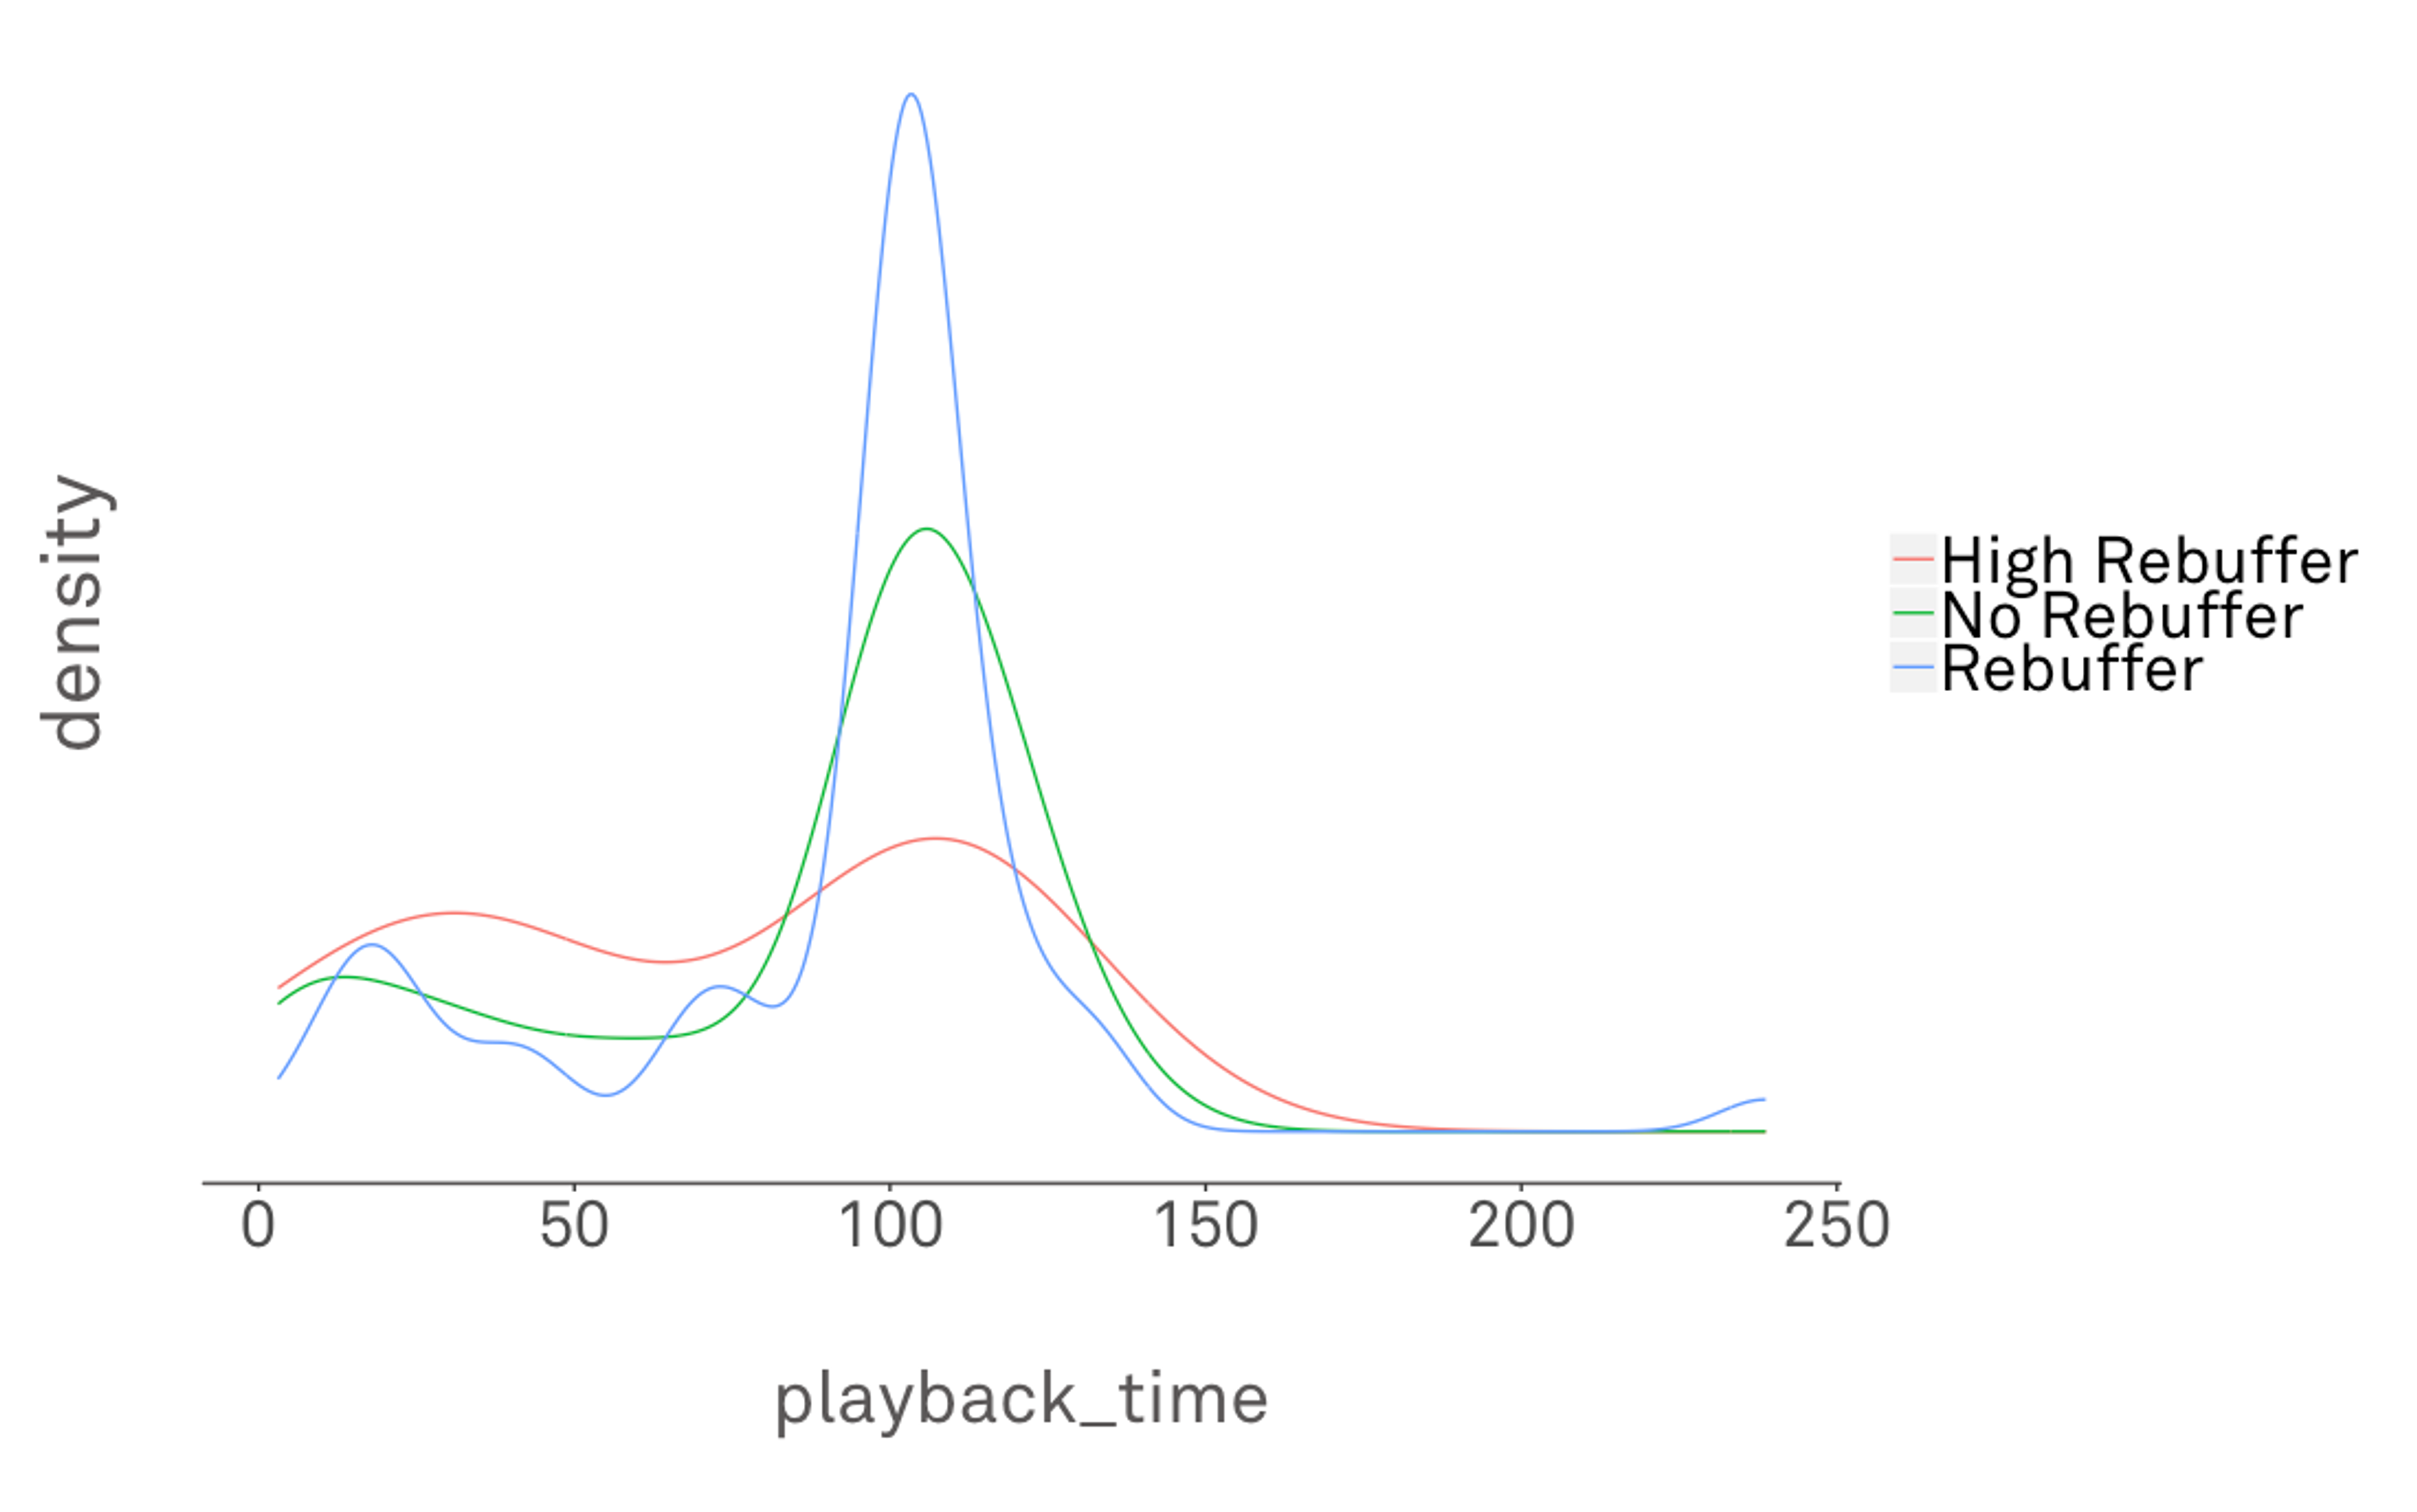 A graph that shows the 1000th most popular video playback time